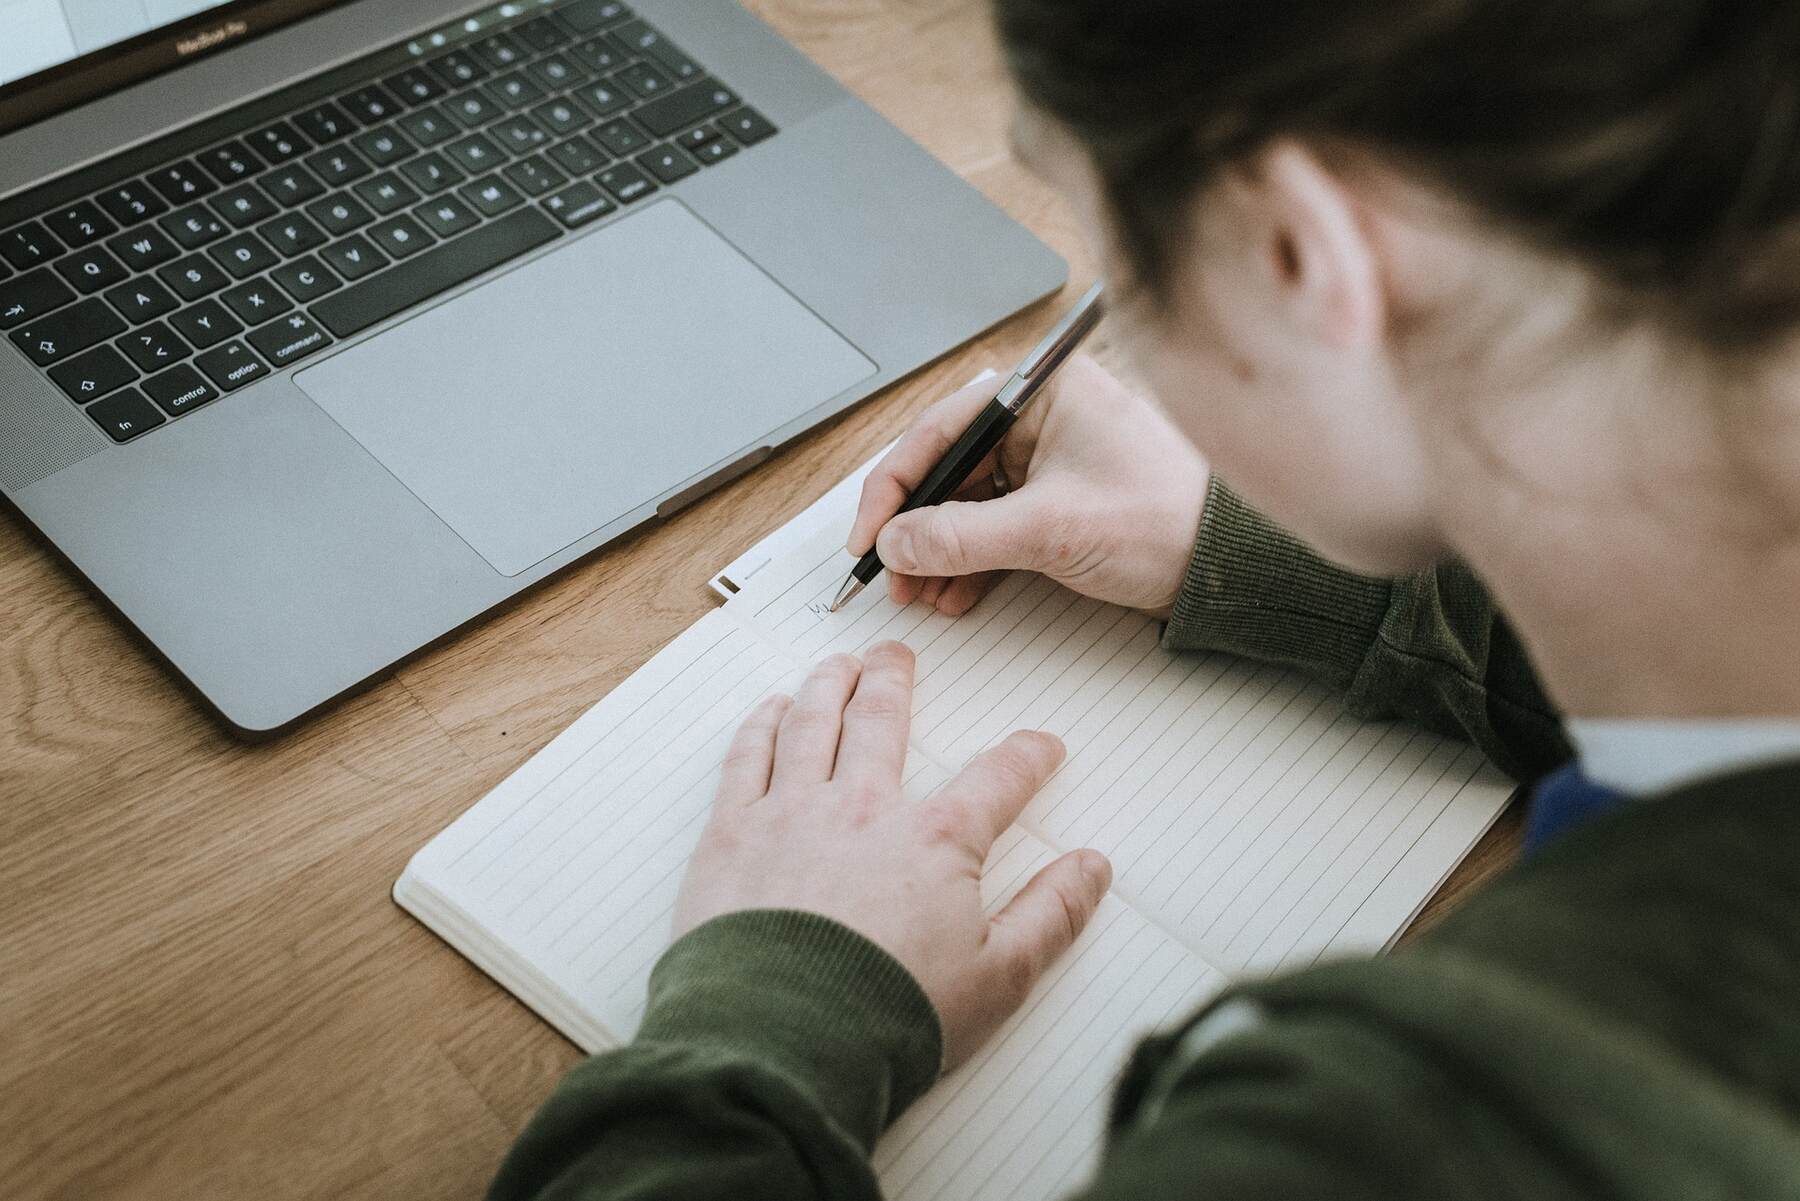 Woman jotting notes in notebook on wooden table with laptop nearby